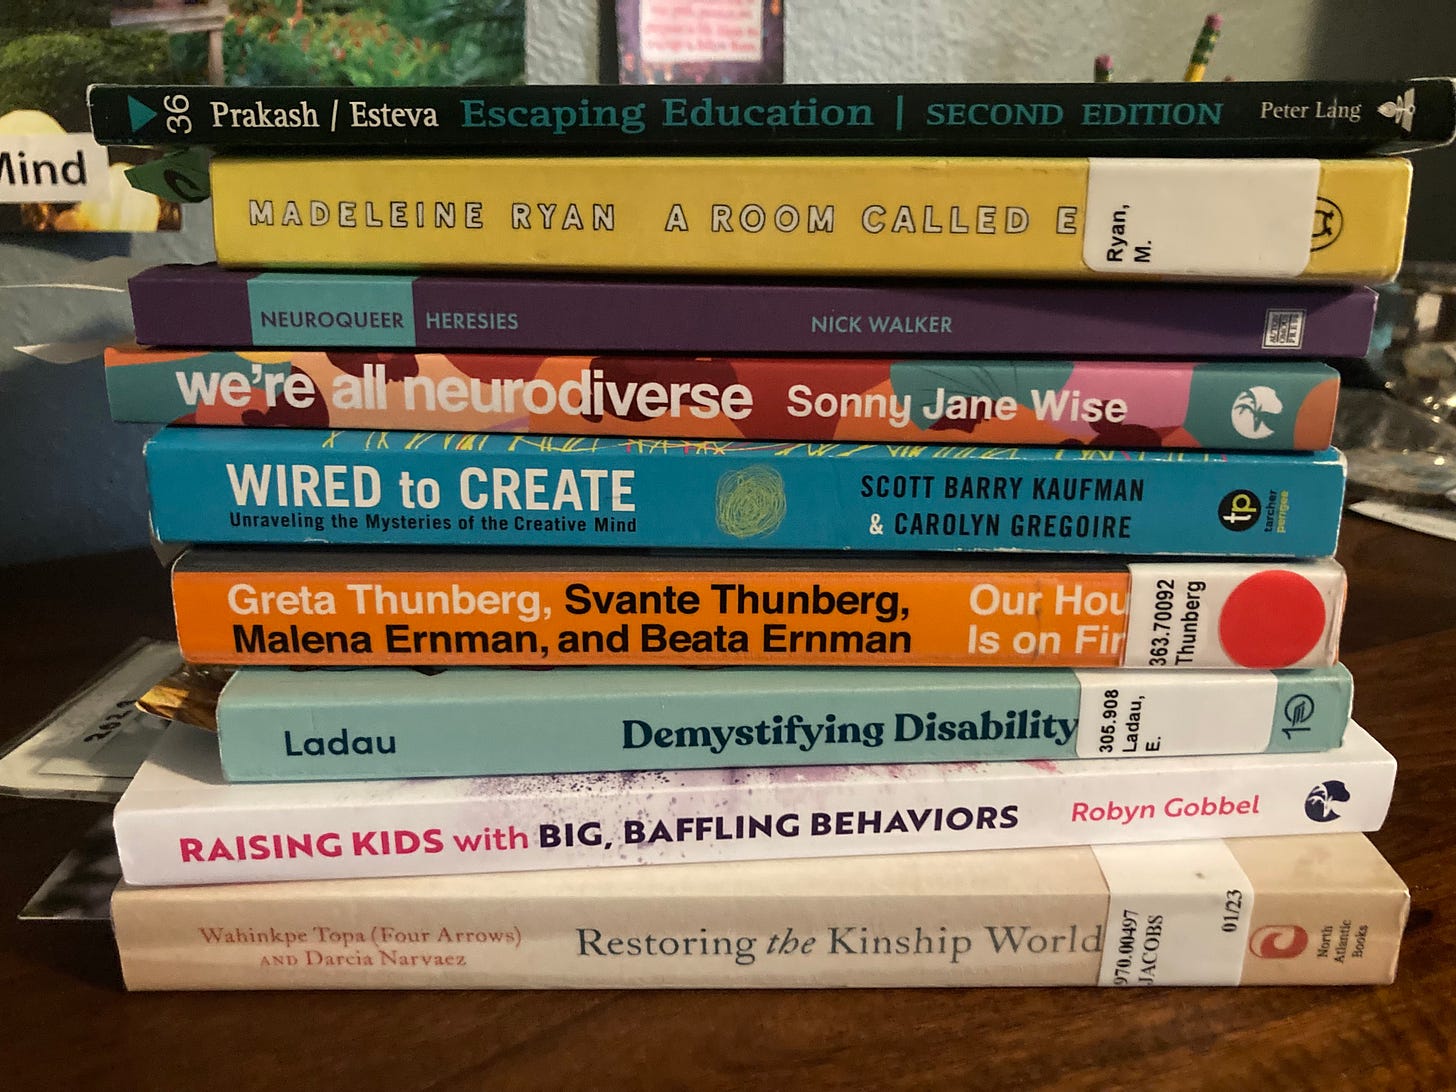 Image is a stack of nine books titled: Escaping Education, A Room Called Earth, Neuroqueer Heresies, We're All Neurodiverse, Wired to Create, Our House is On Fire, Demystifying Disability, Raising Kids with Big, Baffling Behaviors, and Restoring the Kinship Worldview